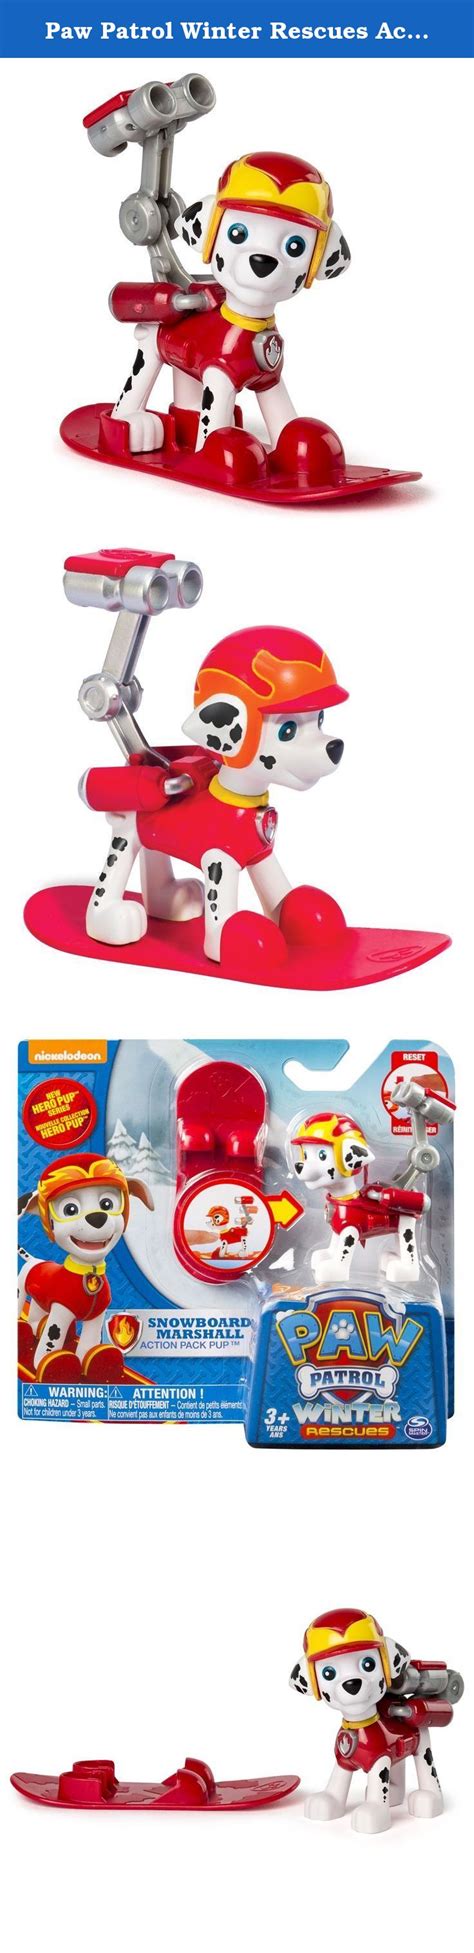 Paw Patrol Winter Rescues Action Pack Pup Snowboard Marshall Marshall